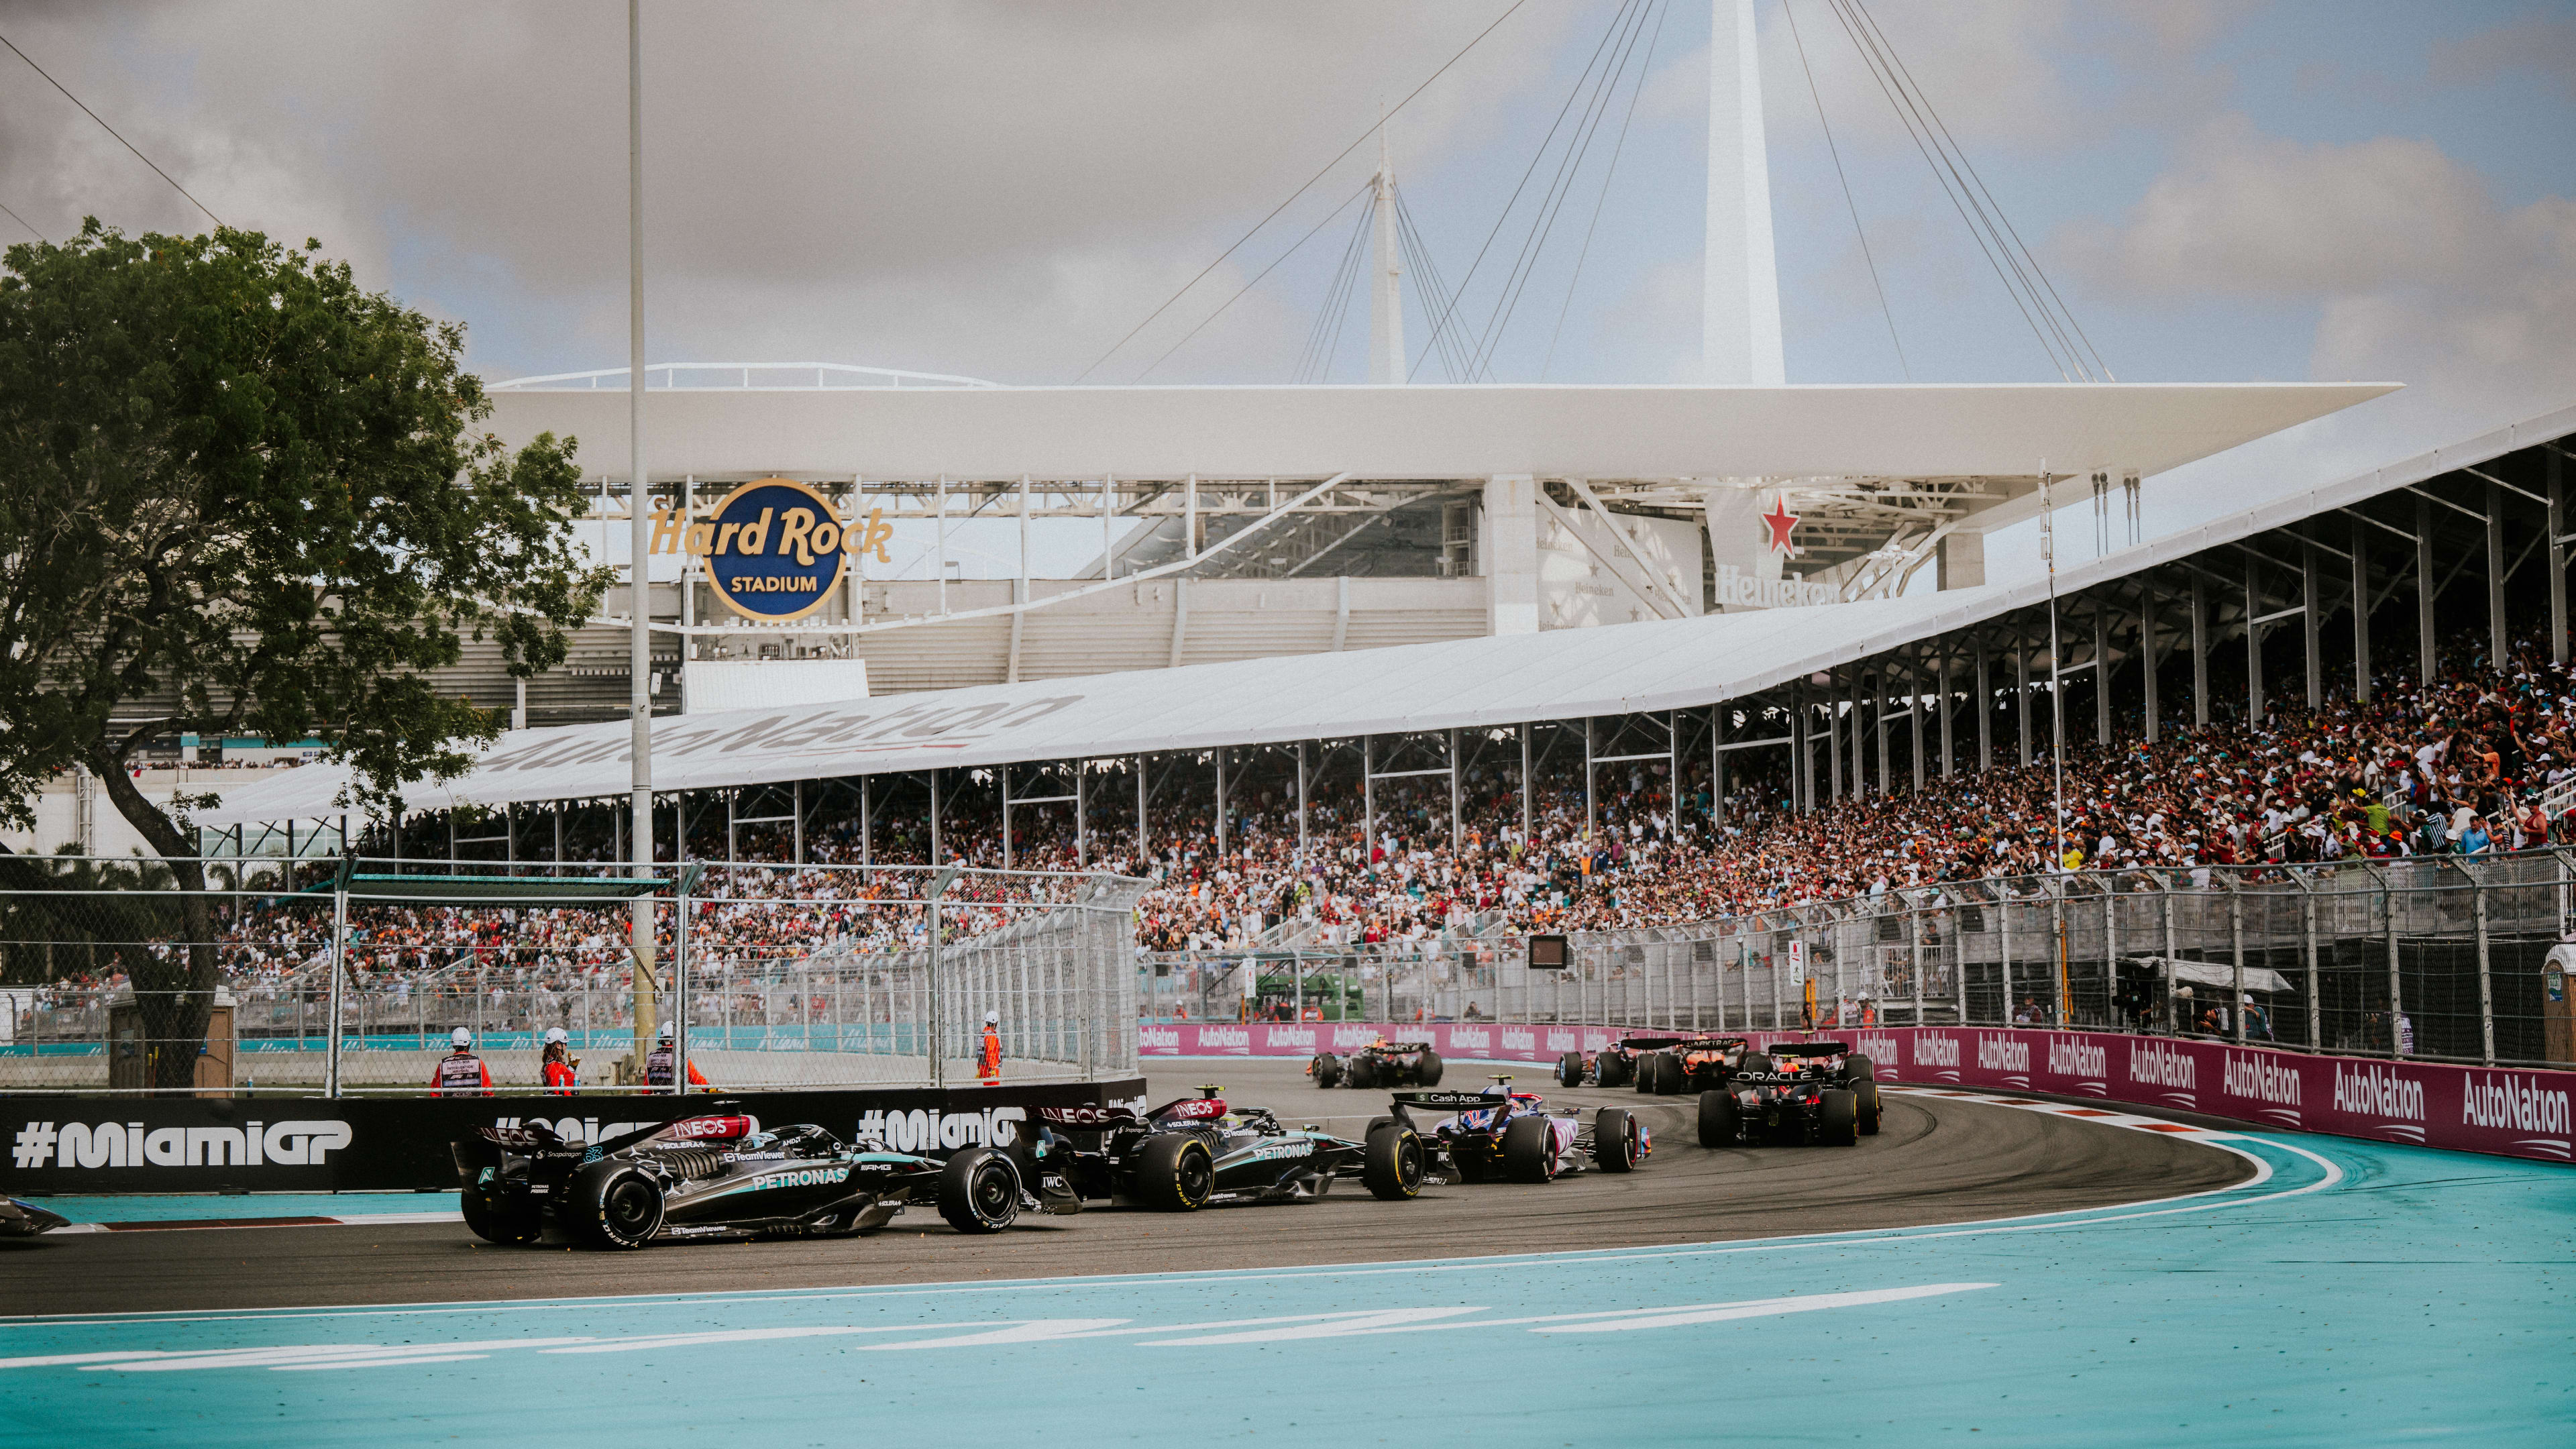 MIAMI, FLORIDA - MAY 05: A general view of the race action during the F1 Grand Prix of Miami at